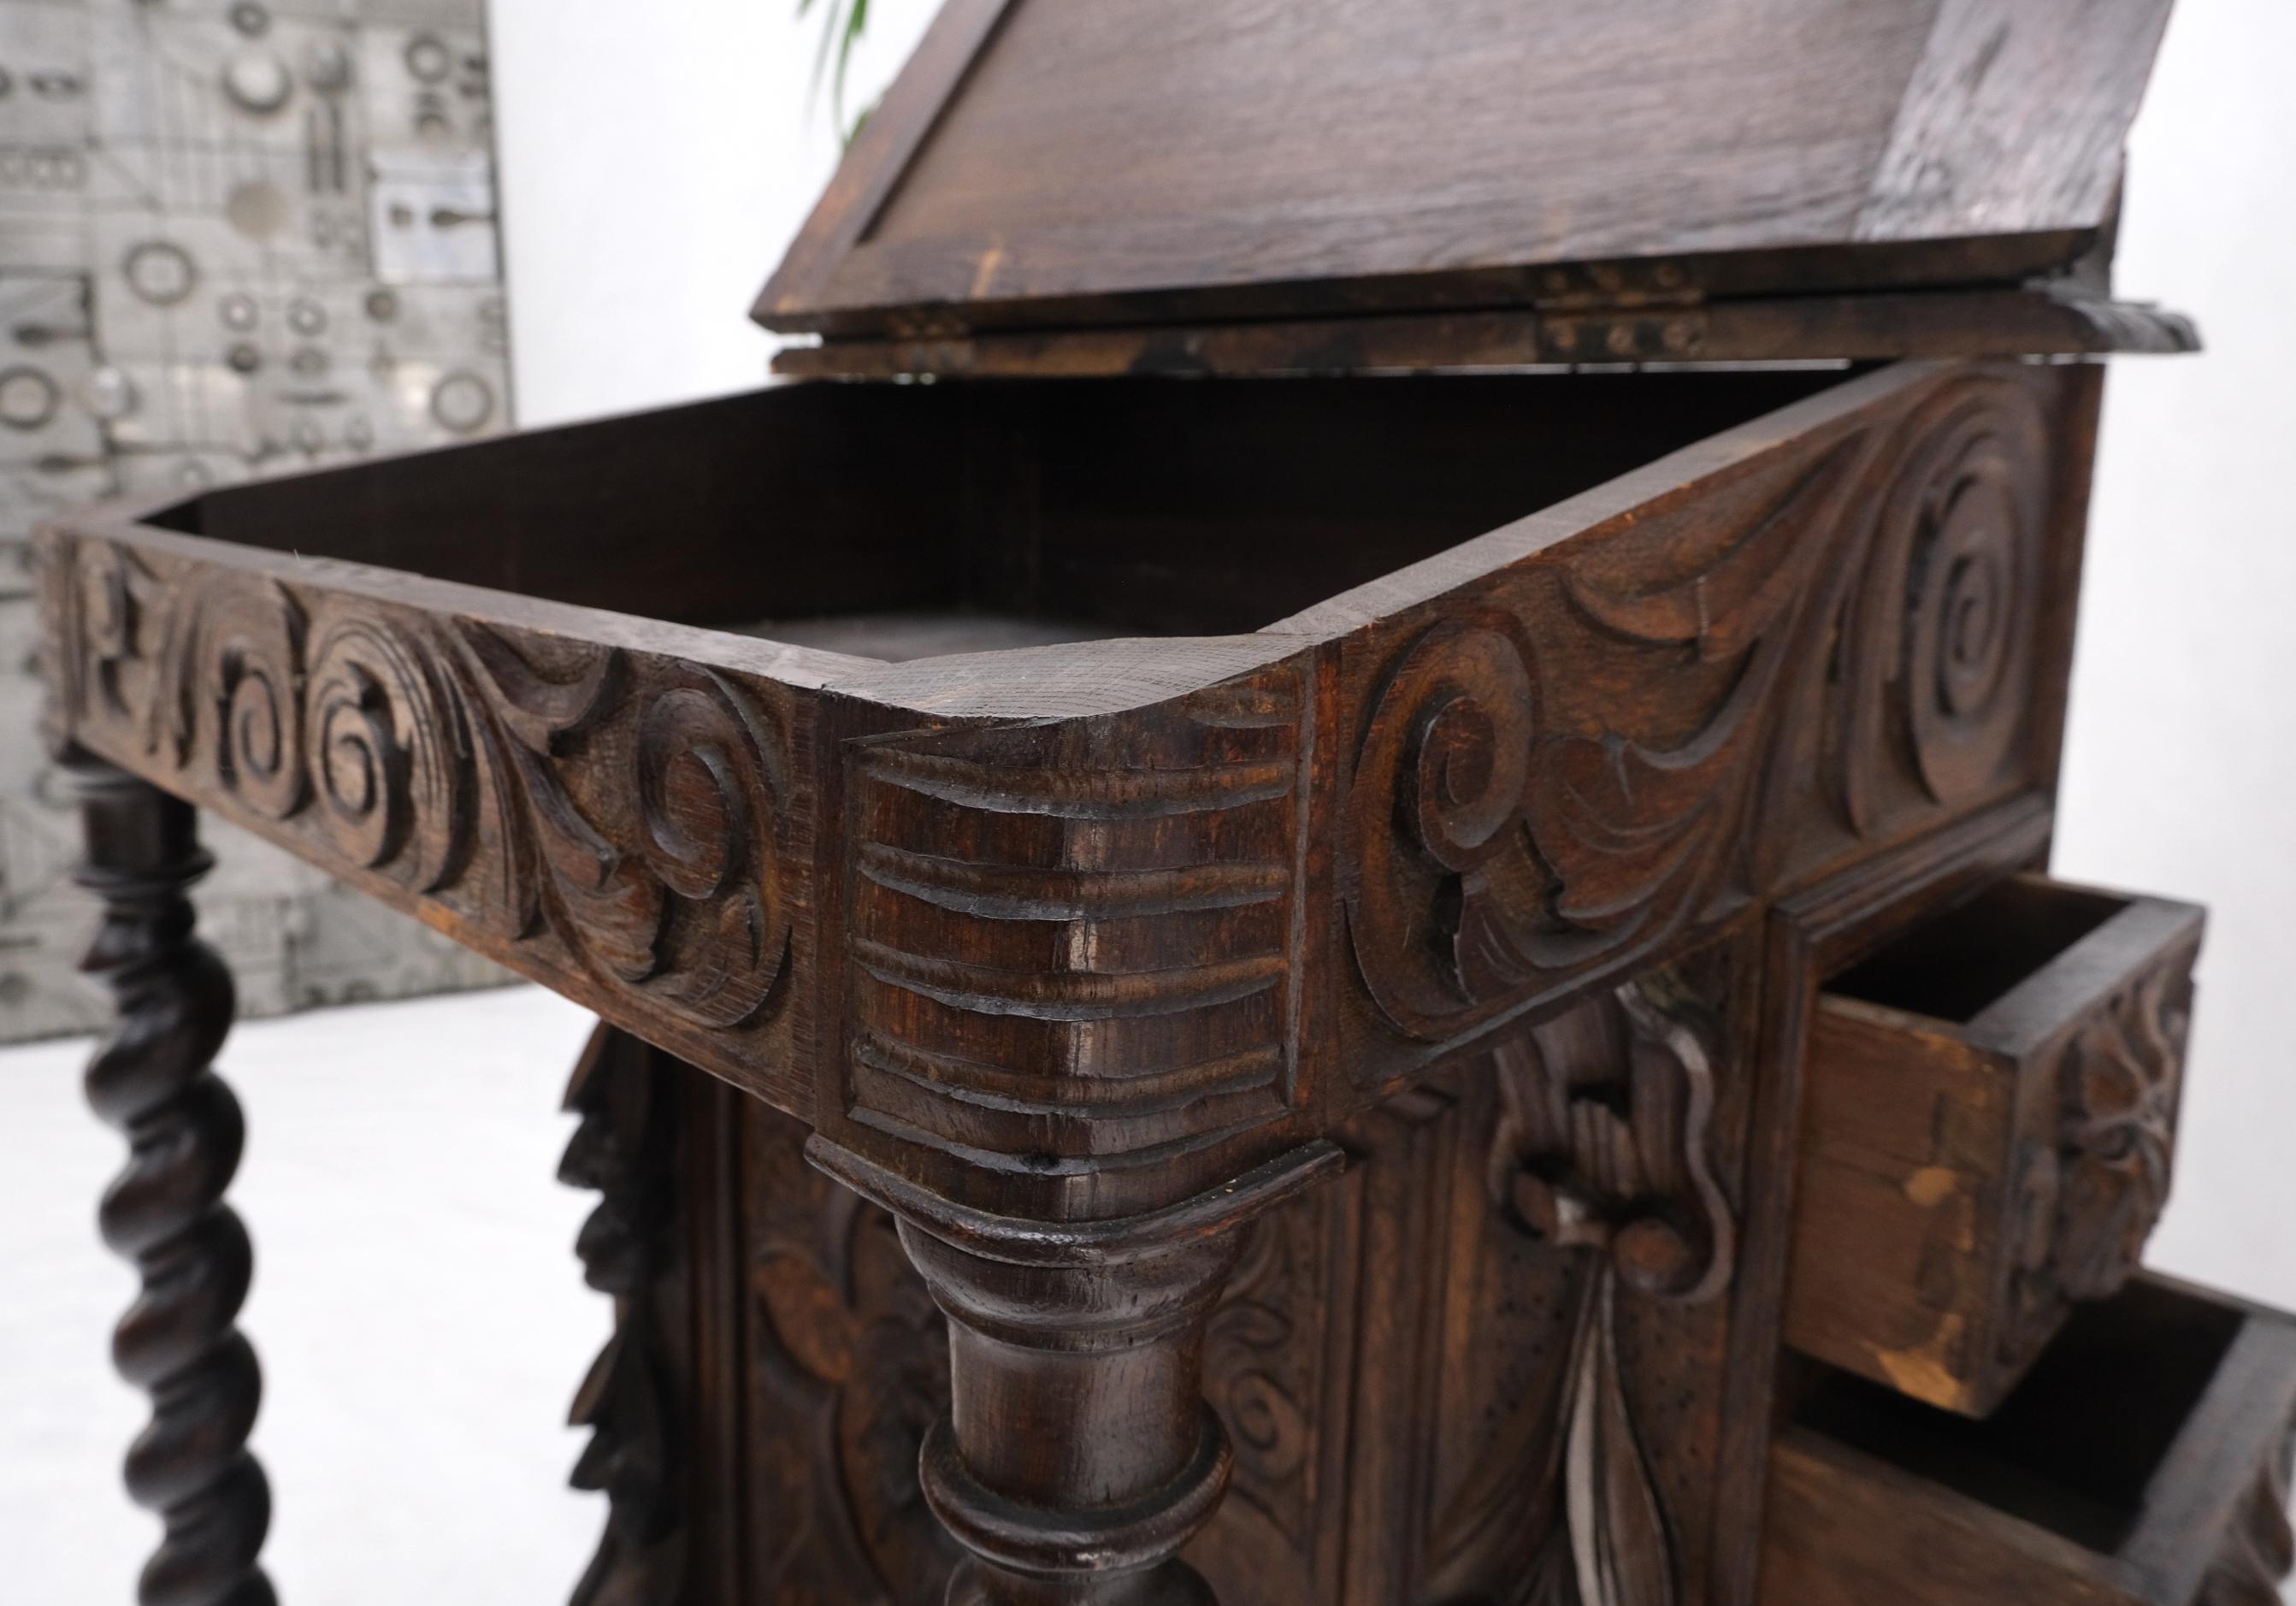 19th Century Davenport Heavily Carved Oak Desk w/ Rope Twist Supports 4 Drawers For Sale 4